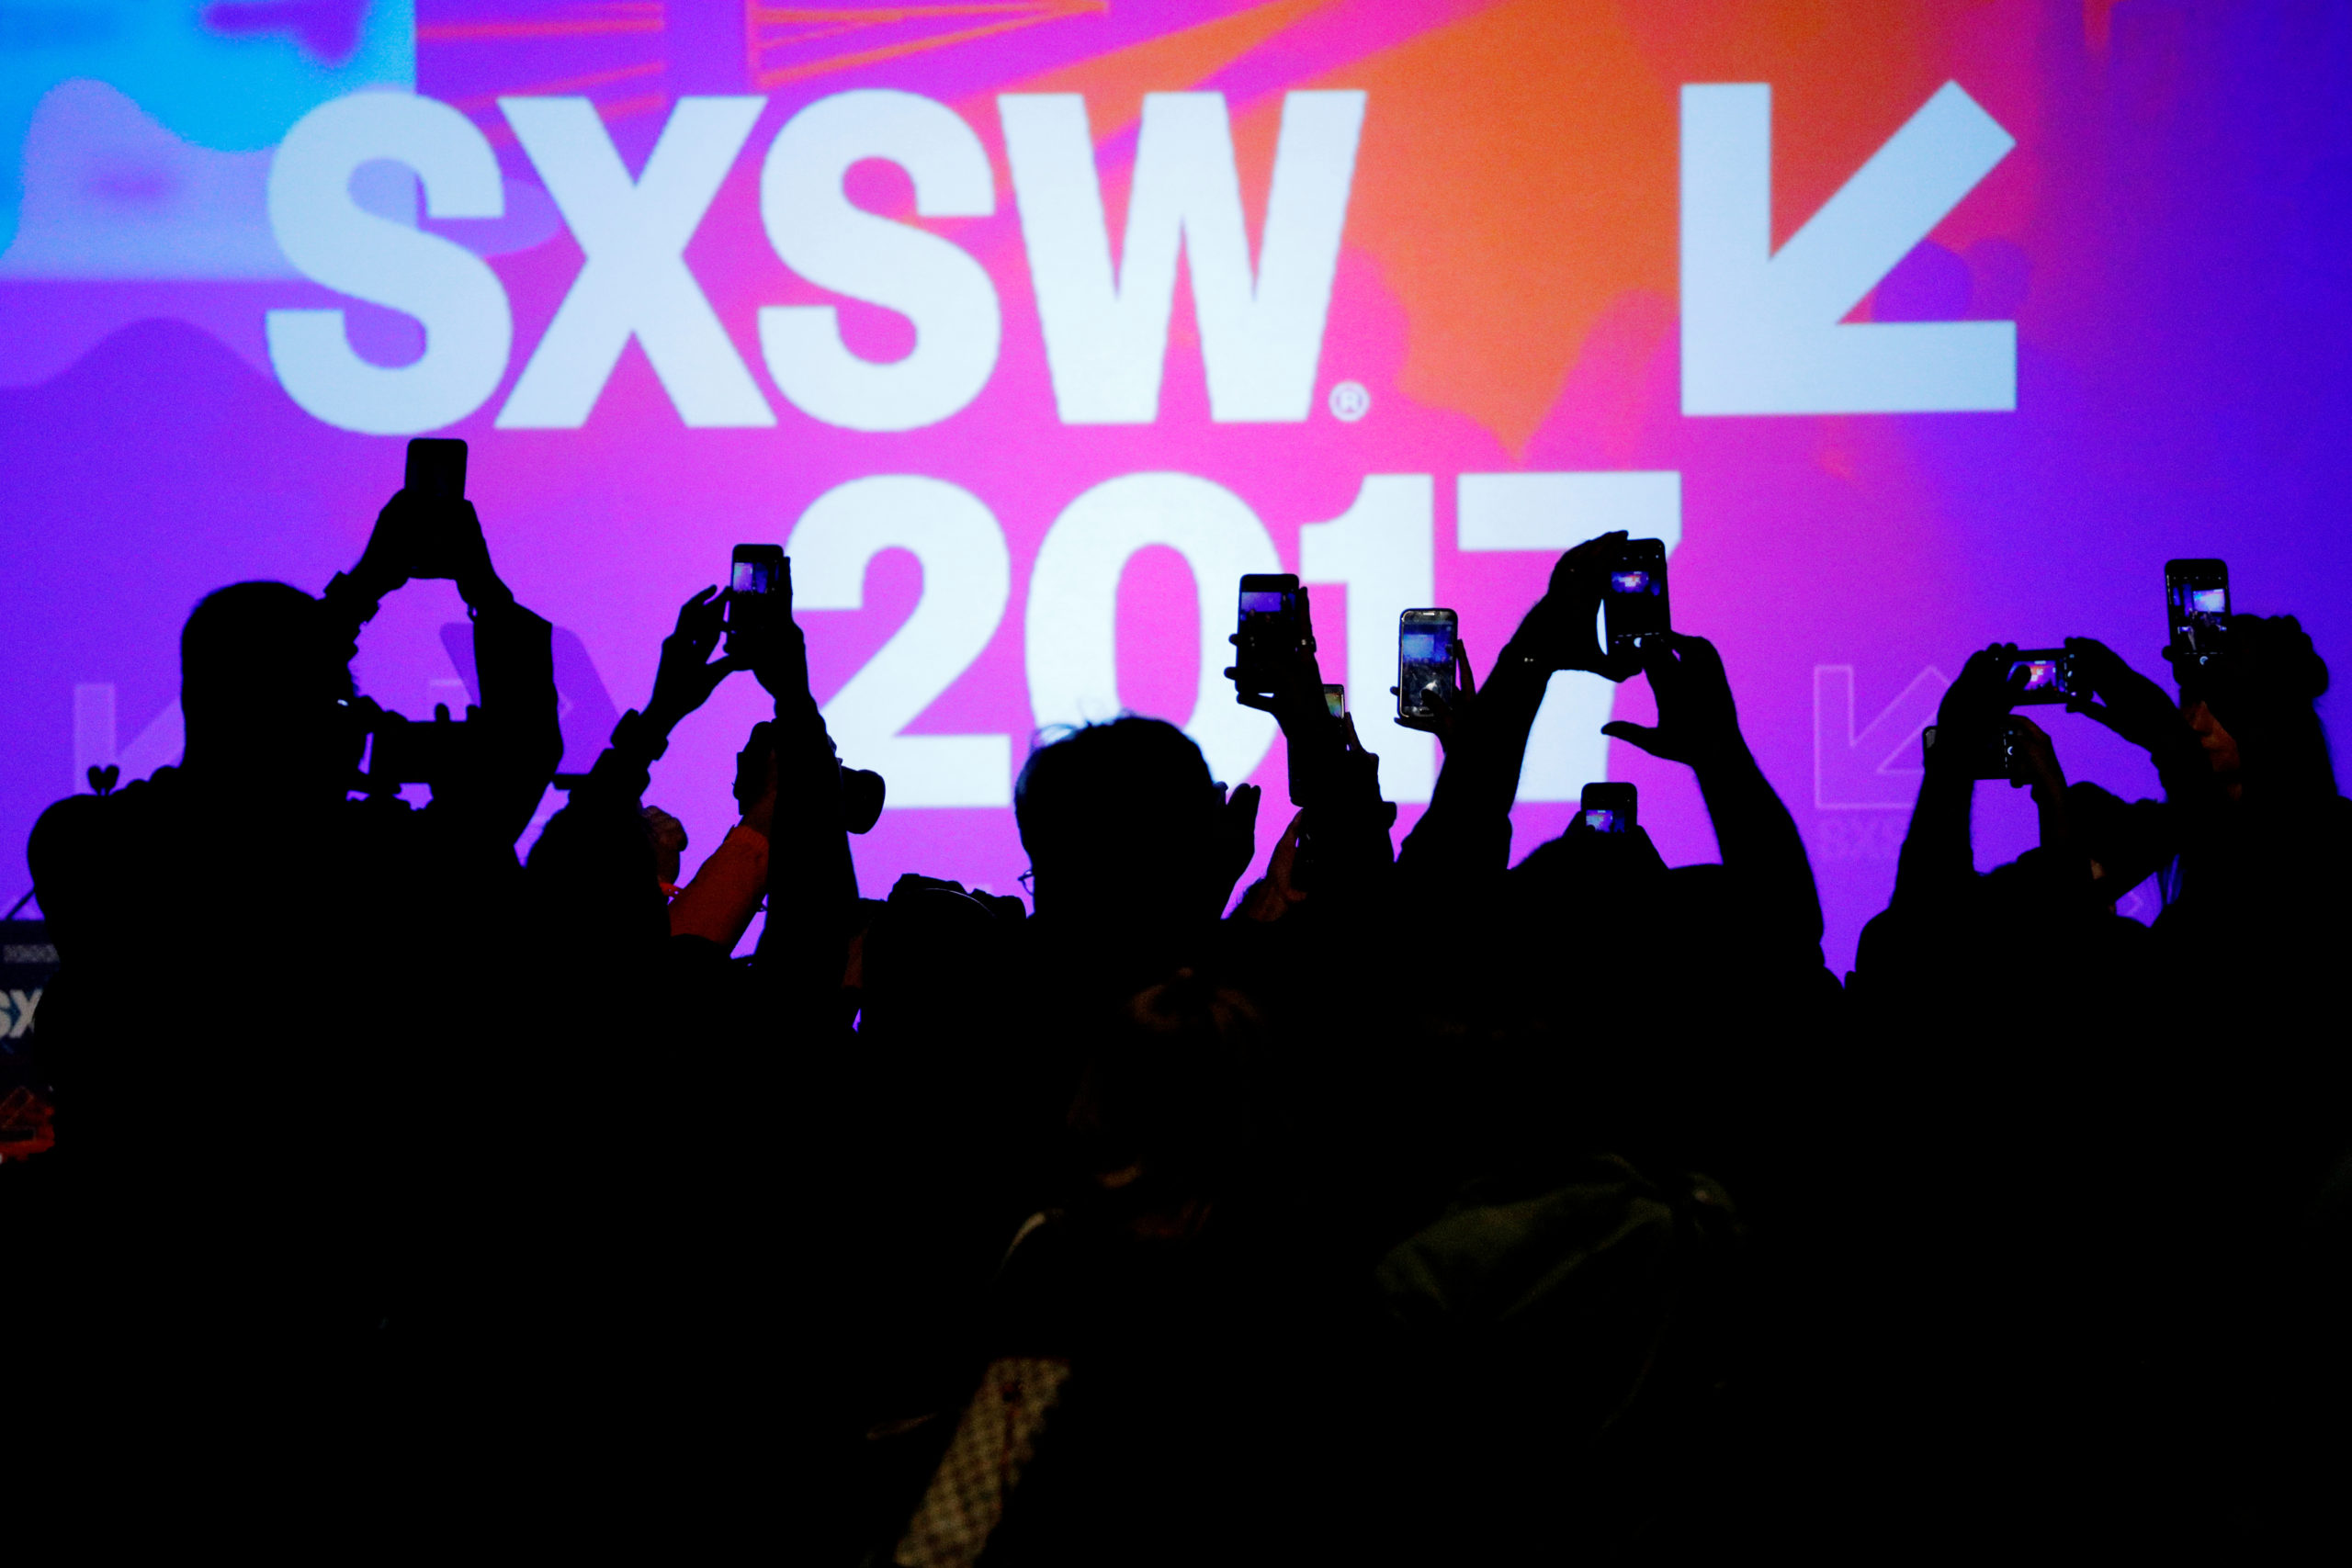 Audience members use their mobile phones to take photographs of former U.S. Vice-President Joe Biden at the South by Southwest (SXSW) Music Film Interactive Festival 2017 in Austin, Texas, U.S., March 12, 2017.   REUTERS/Brian Snyder - RC1F3E133700